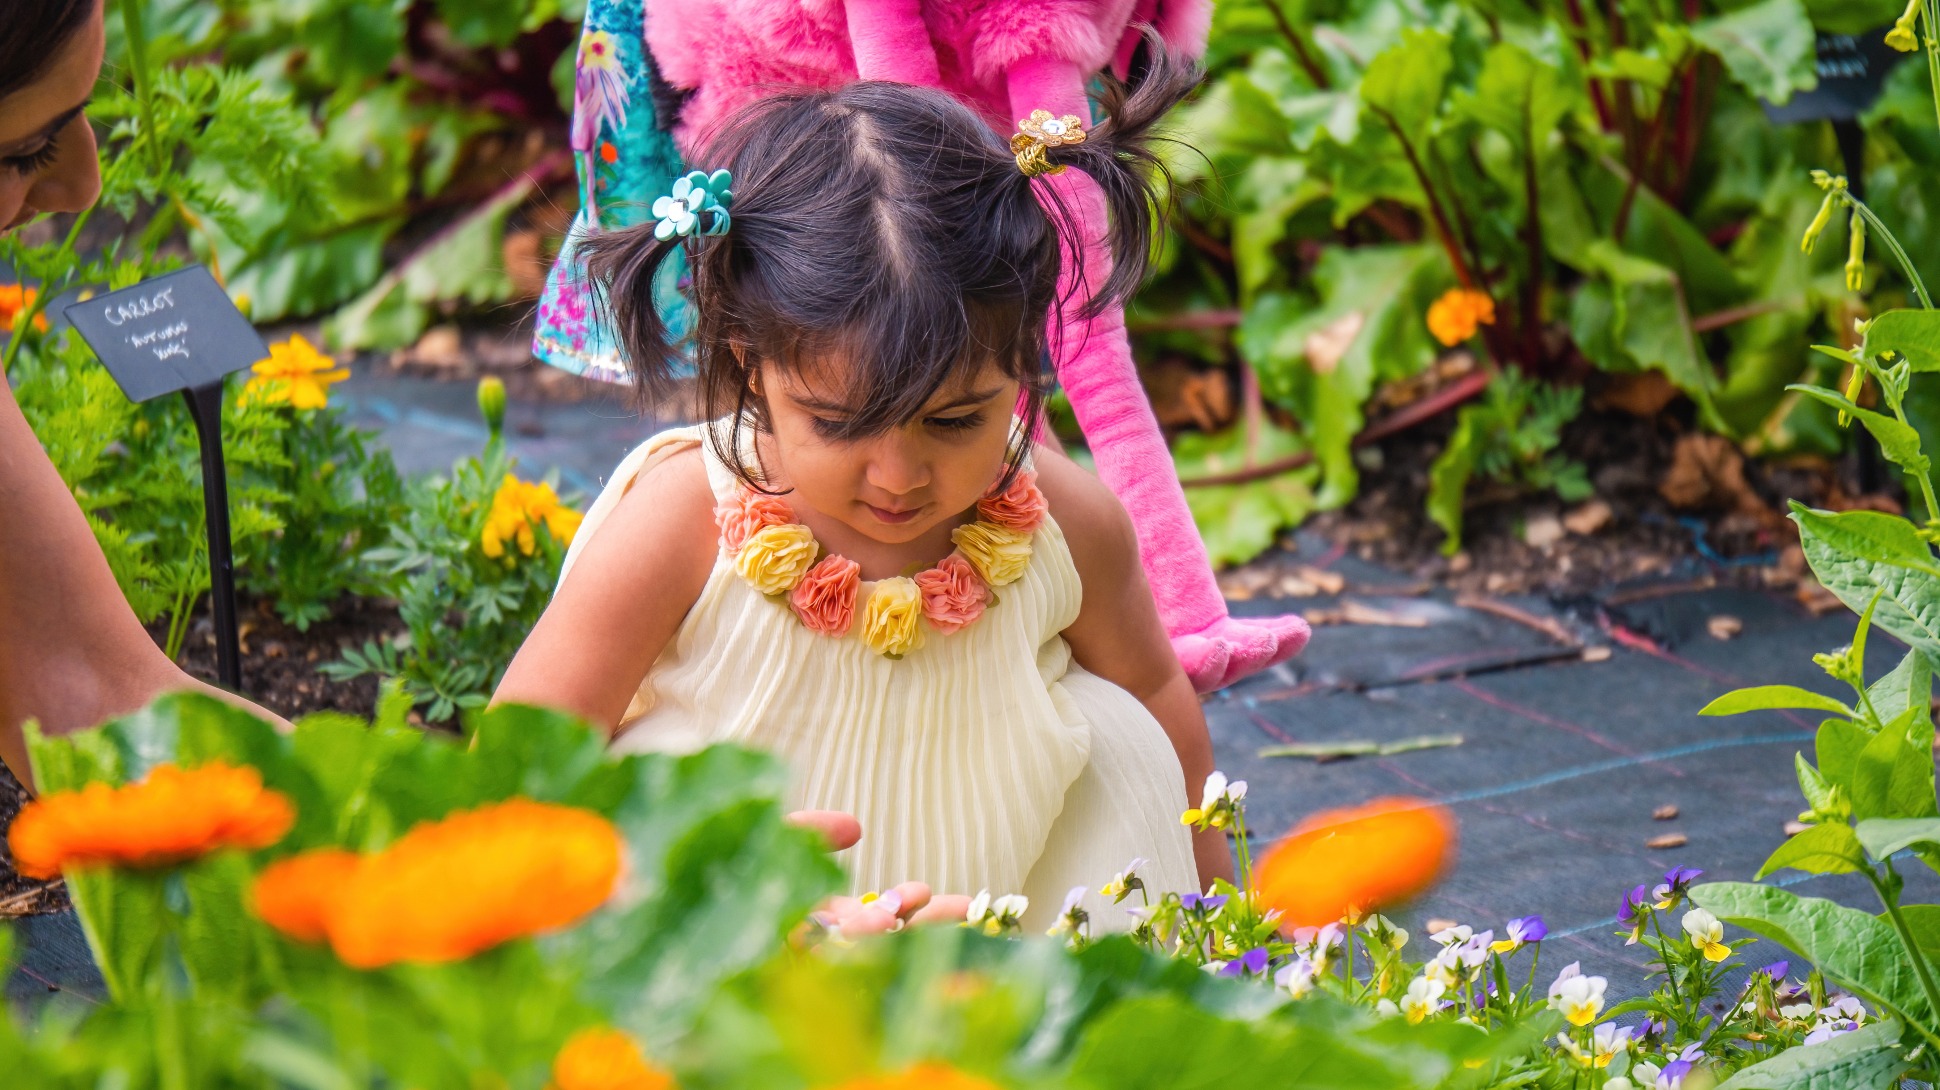 A young child crouched down in a vegetable garden